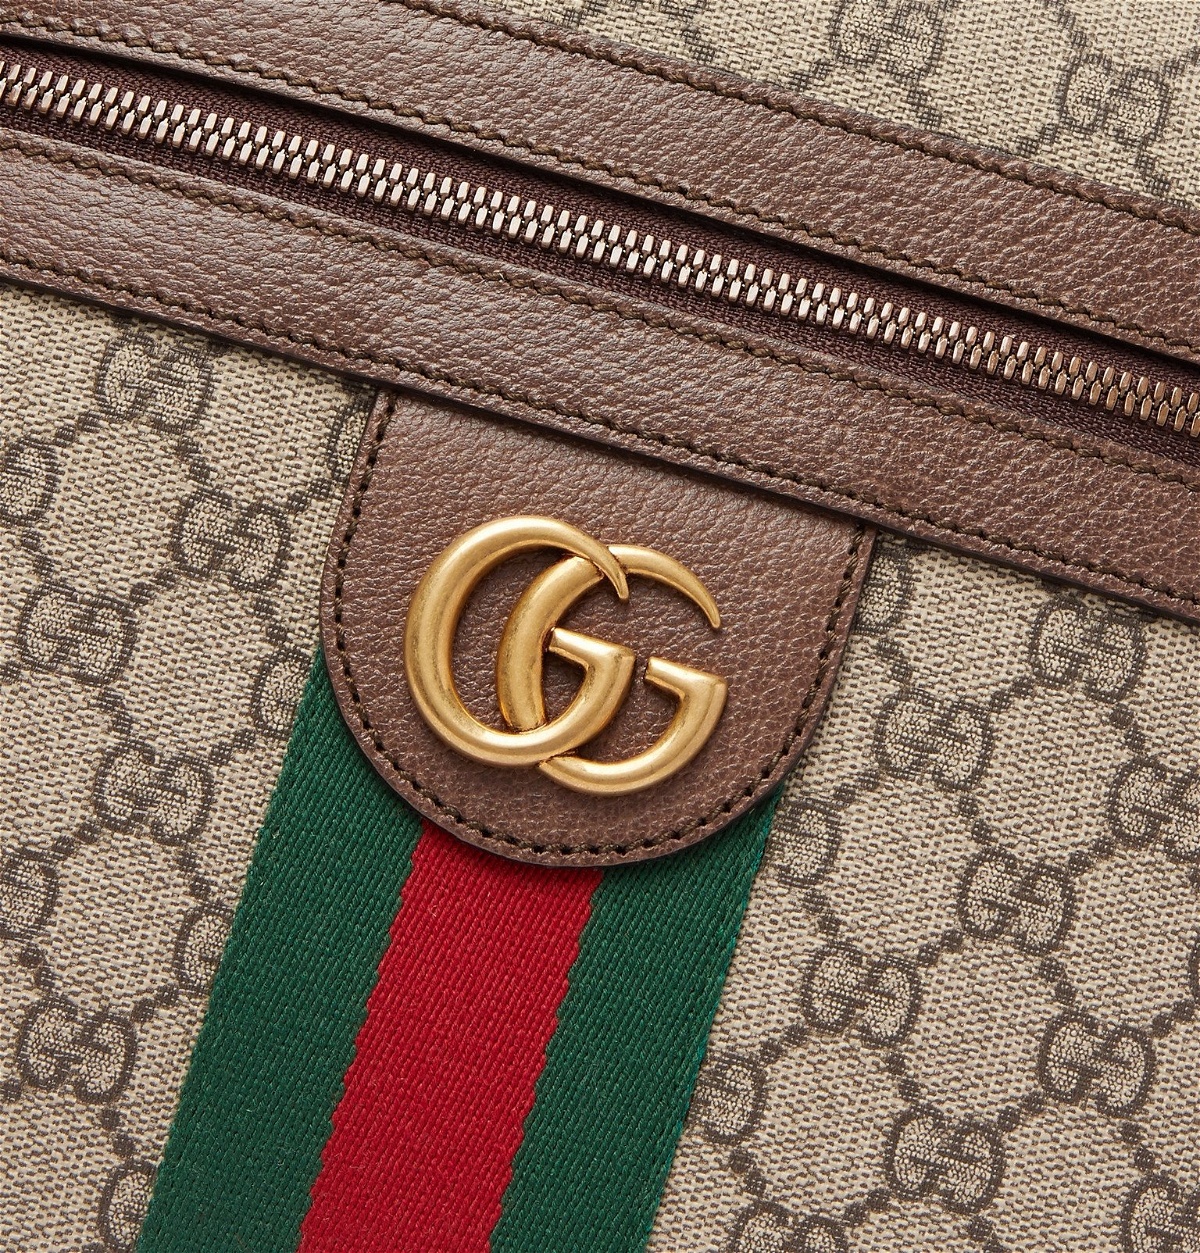 GUCCI Ophidia Mini Leather-Trimmed Monogrammed Coated-Canvas